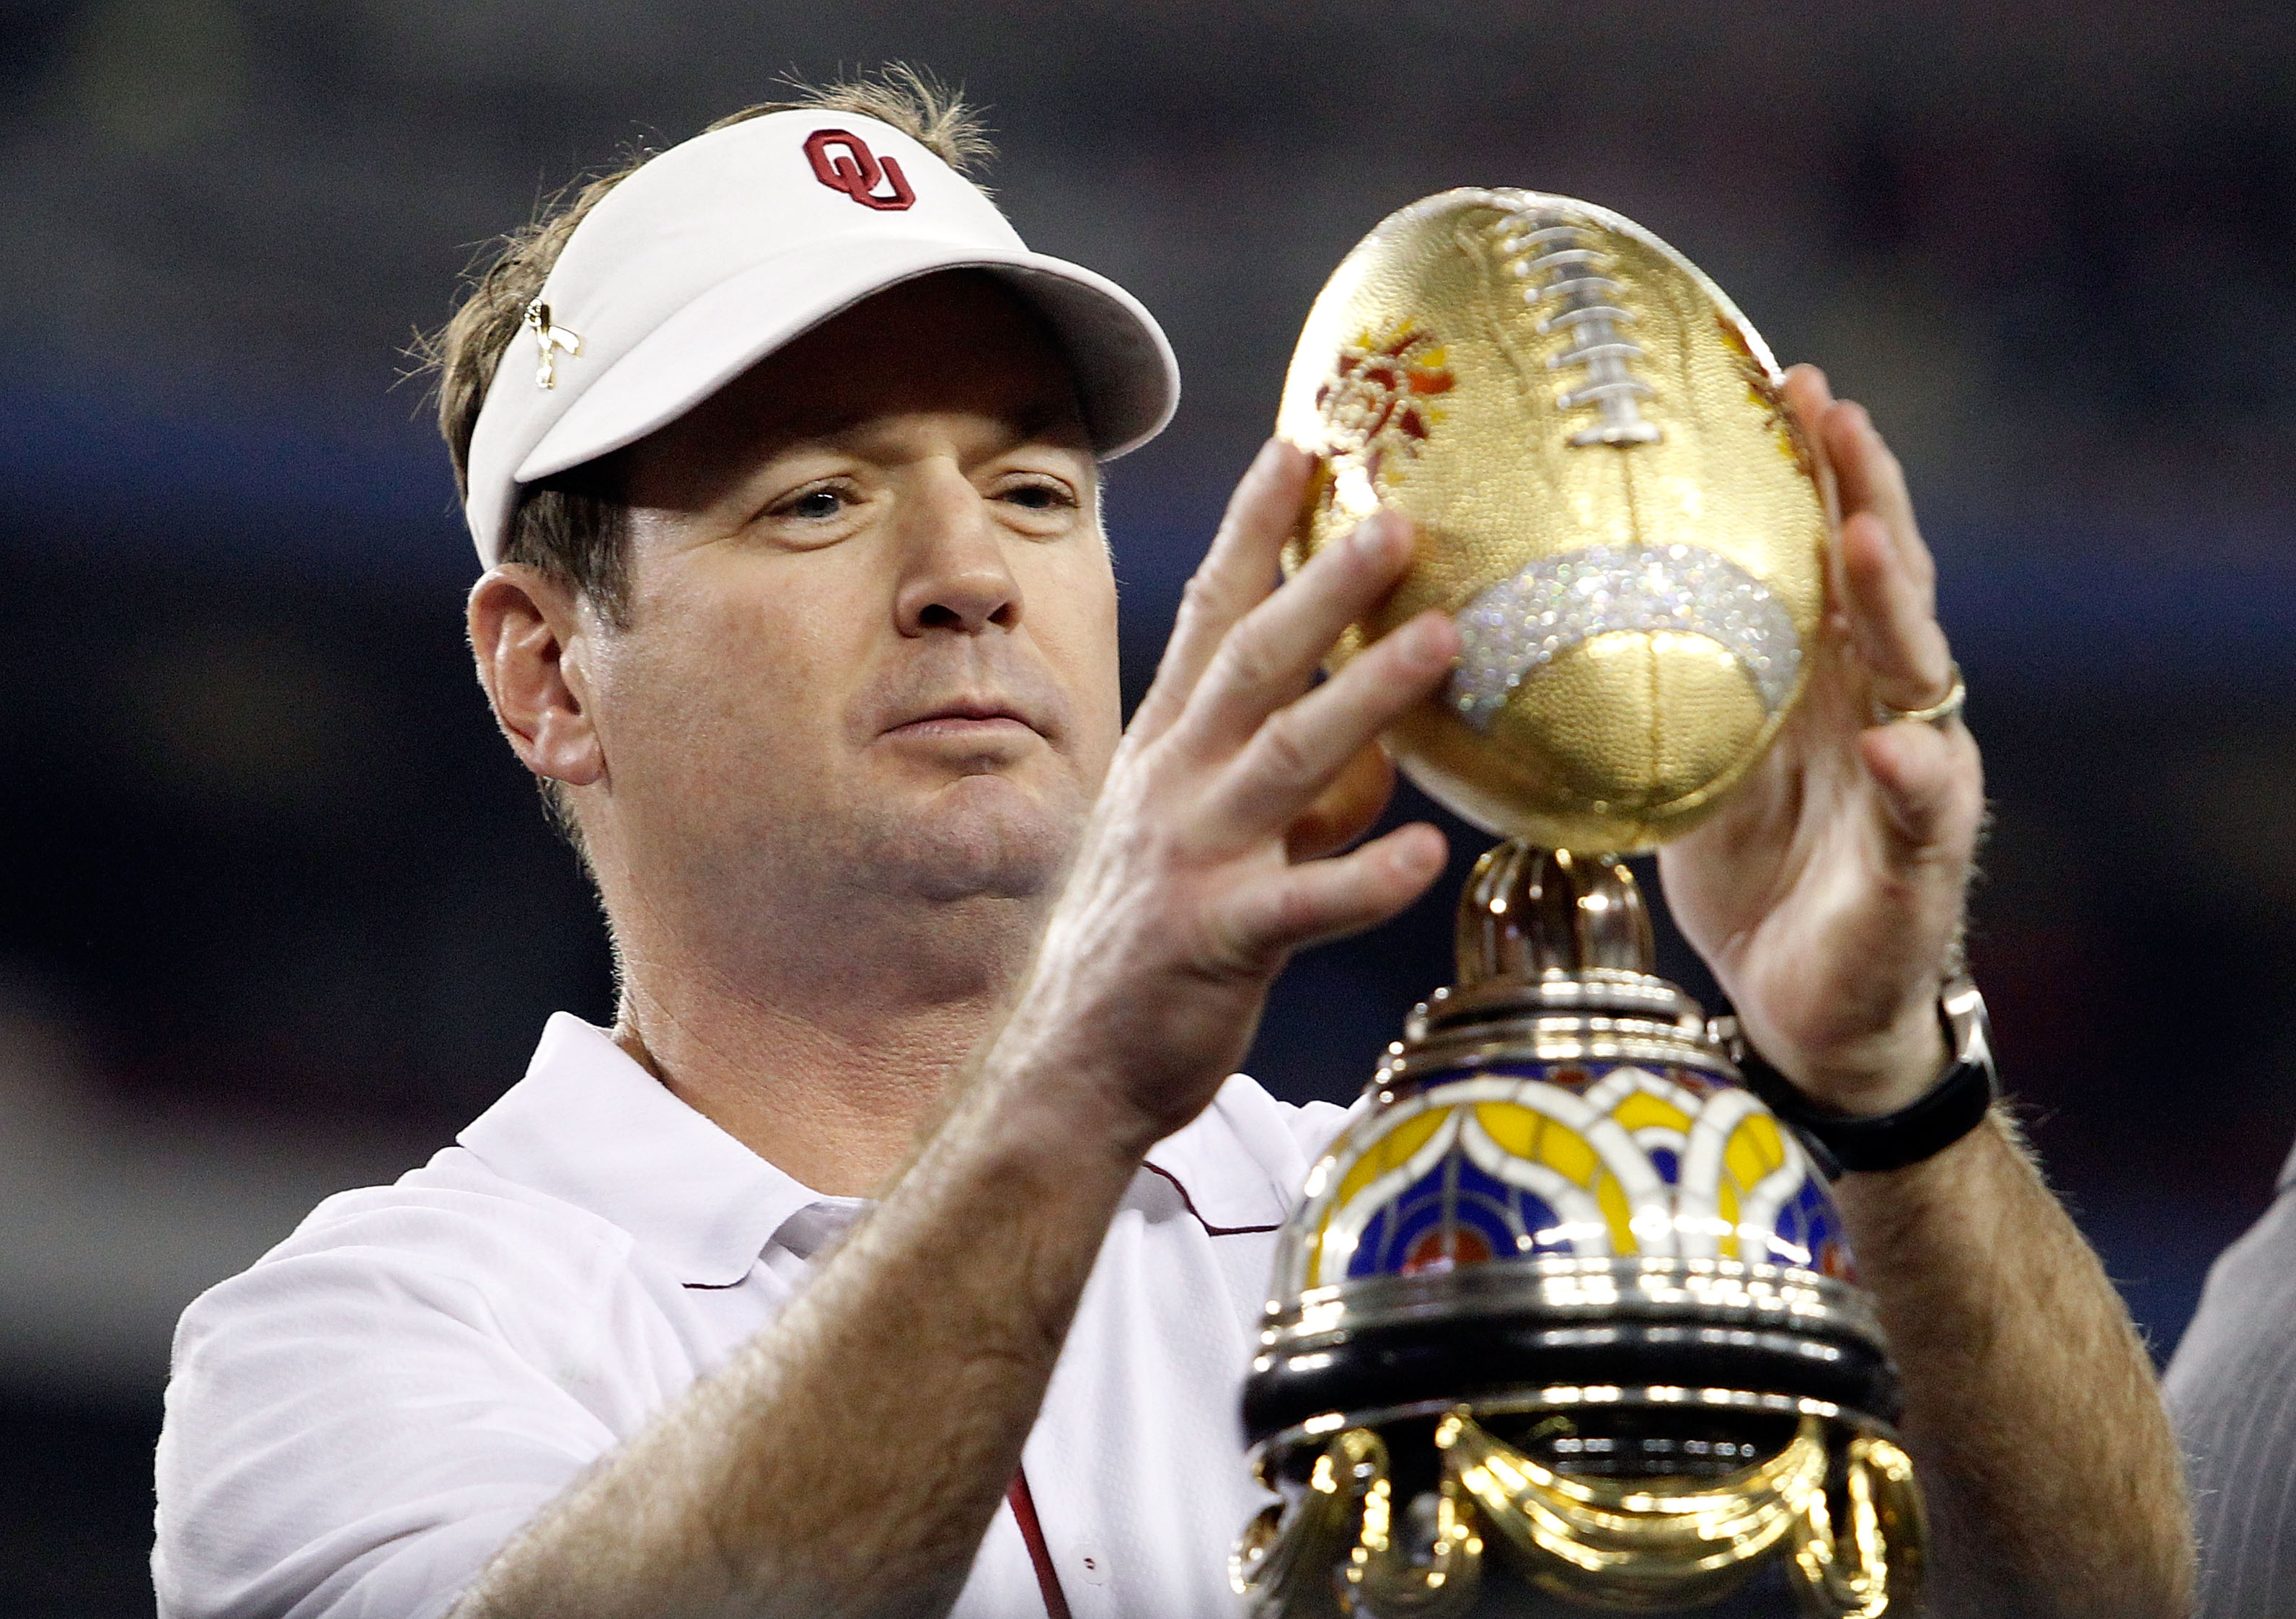 GLENDALE, AZ - JANUARY 01:  Head coach Bob Stoops of the Sooners celebrates the 48-20 victory against the Connecticut Huskies during the Tostitos Fiesta Bowl at the Universtity of Phoenix Stadium on January 1, 2011 in Glendale, Arizona.  (Photo by Tom Pen